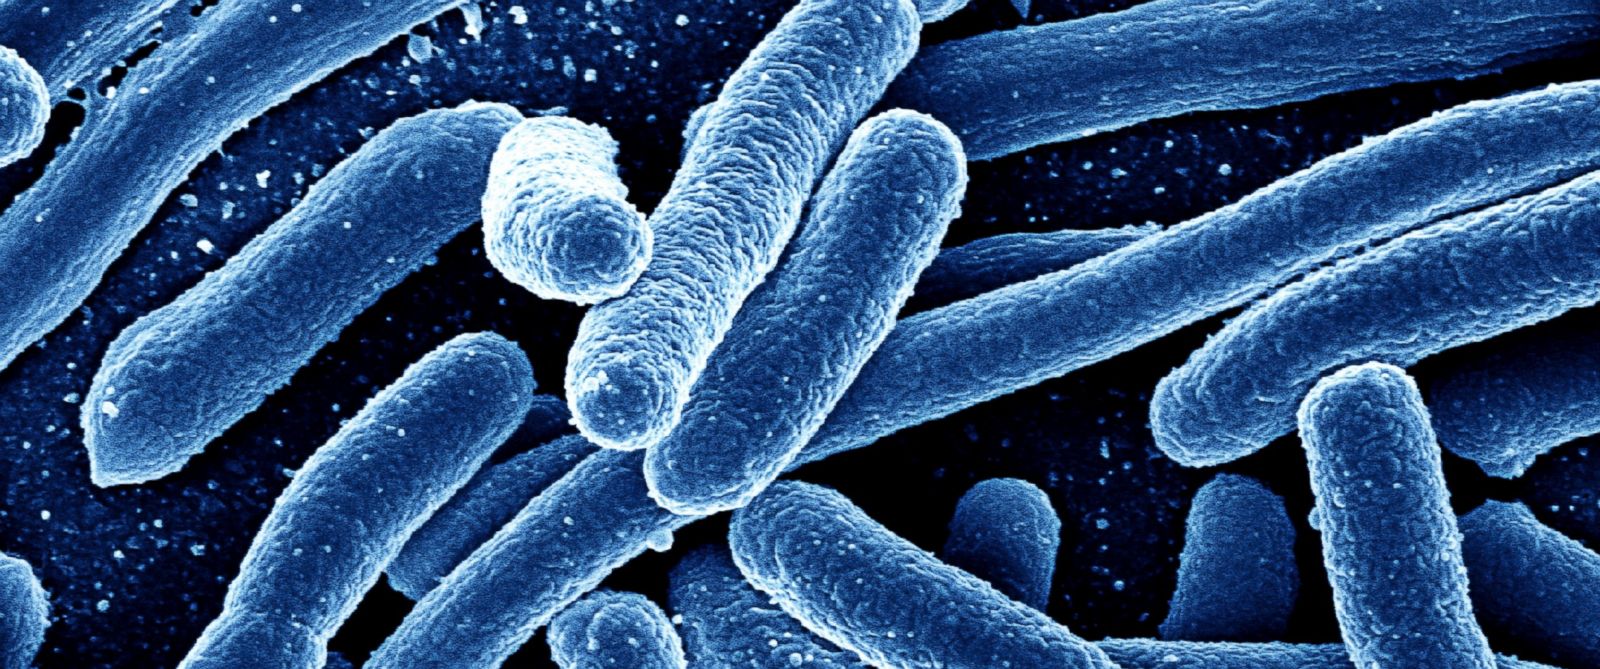 Bacteria Meaning and Definition